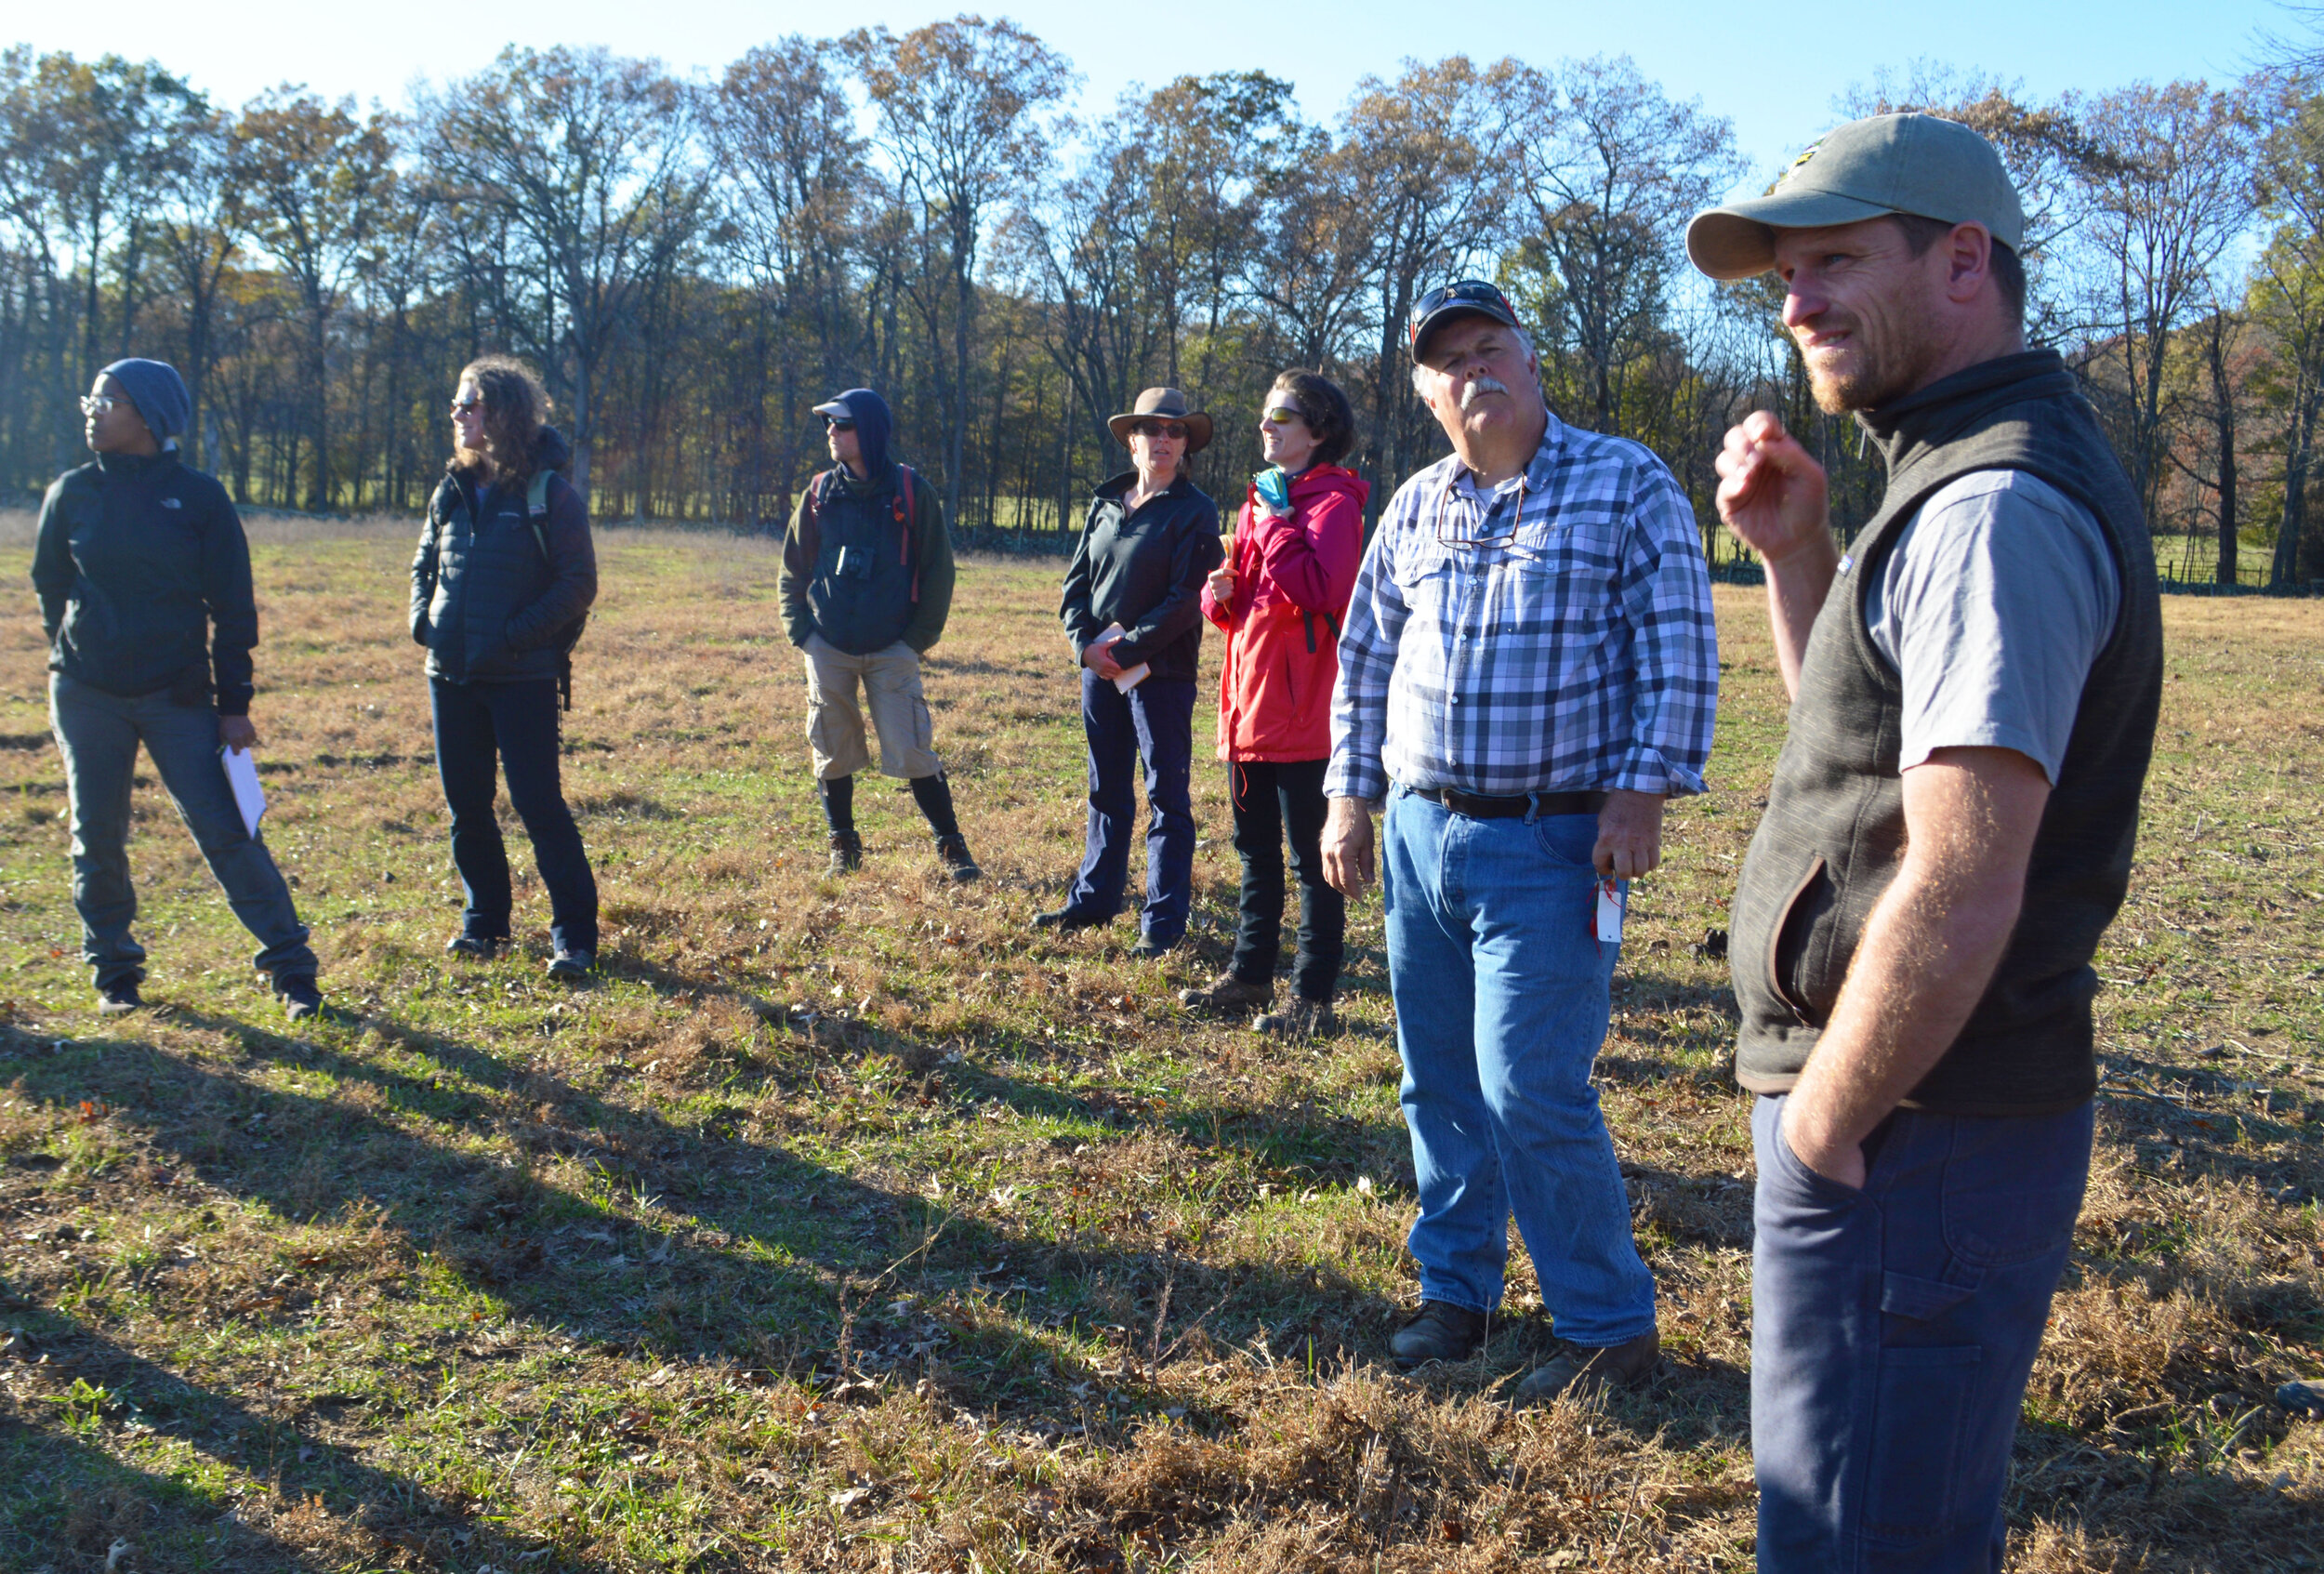  Ecologist Michael Gaige, far right, and local pasture expert Mike Sands, at his left, discuss the grass and soil composition in one of Rokeby’s horse pastures. Mike Sands, who runs Bean Hollow Grassfed farm in Flint Hill, is one of the expert guest 